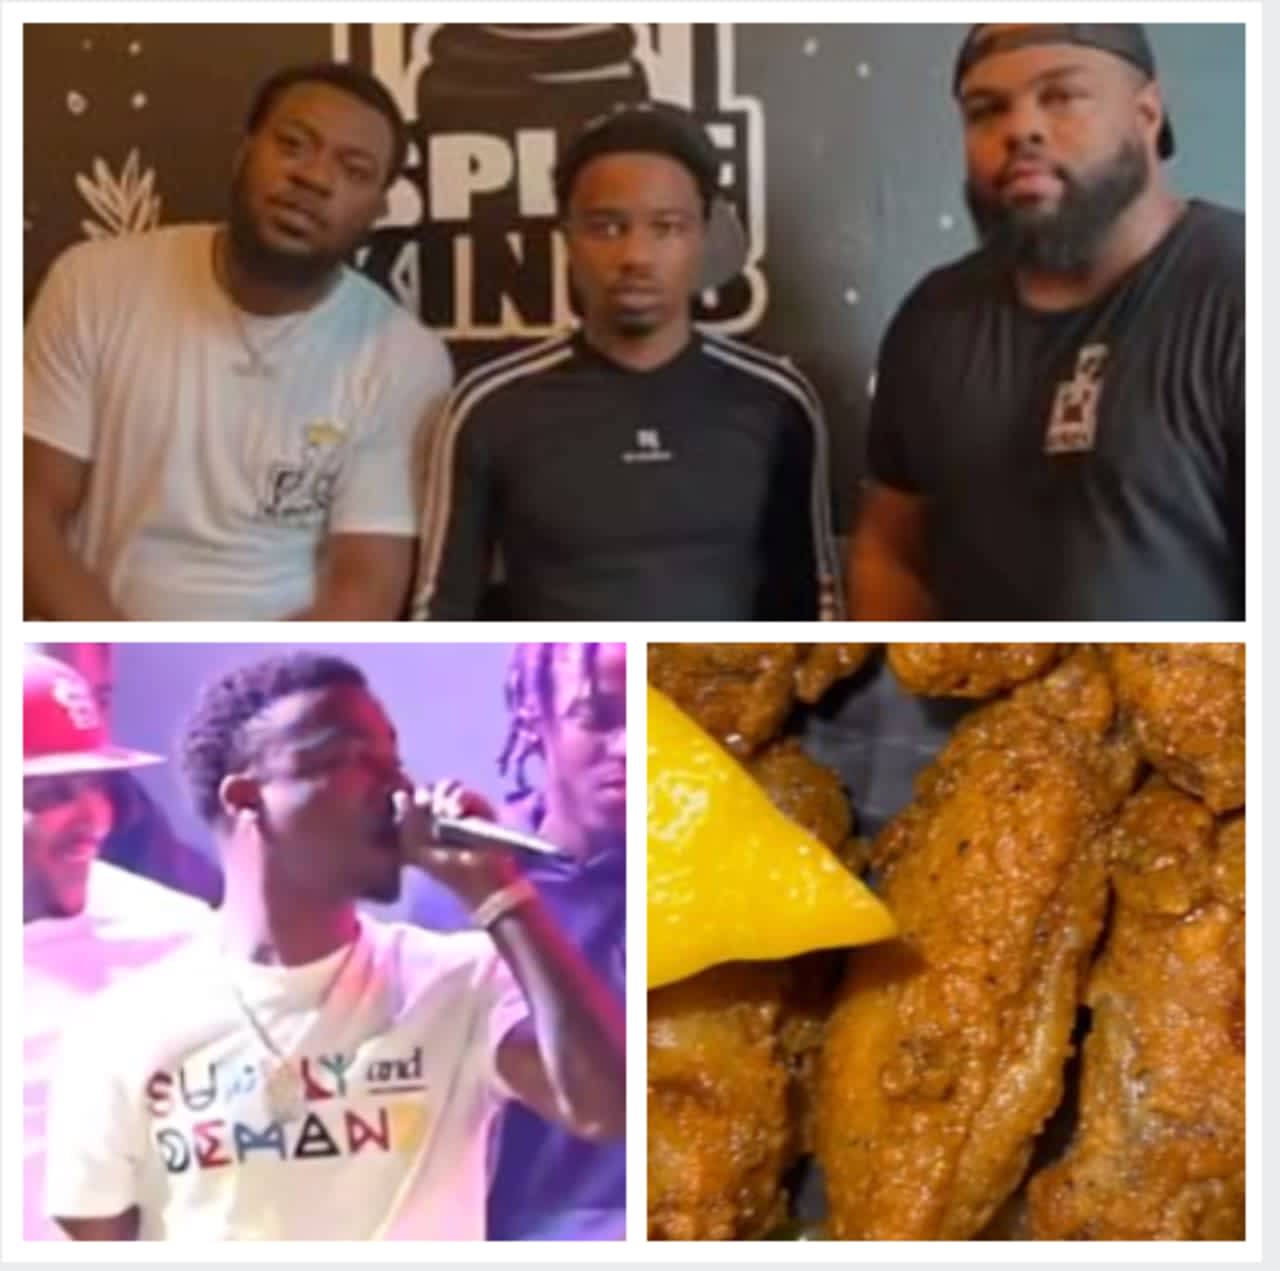 Roddy Ricch at Spice Kings Kitchen (top), his favorite dish (bottom right), and a live performance photo from Aug. 13, 2019.